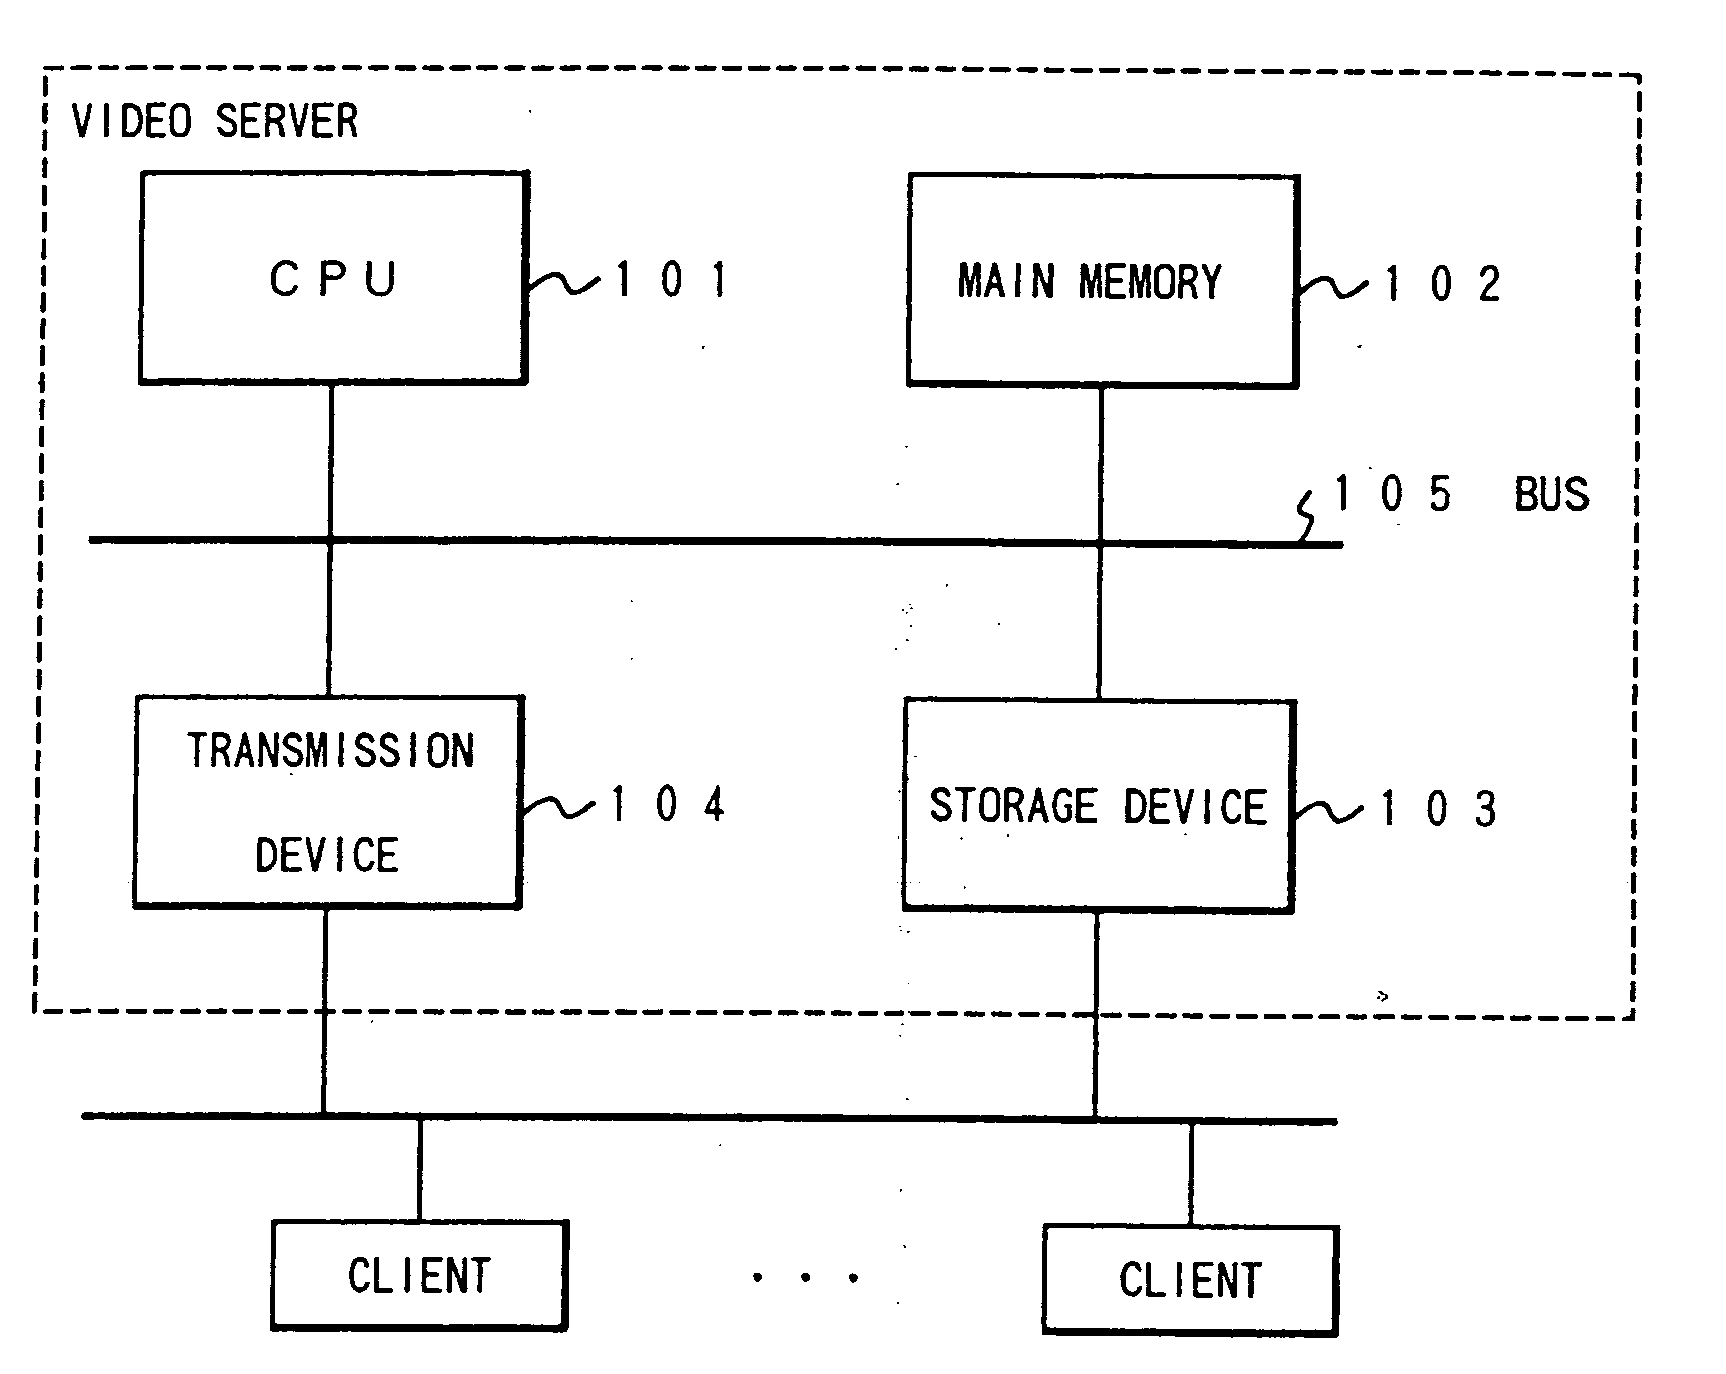 Multimedia data processing system in network